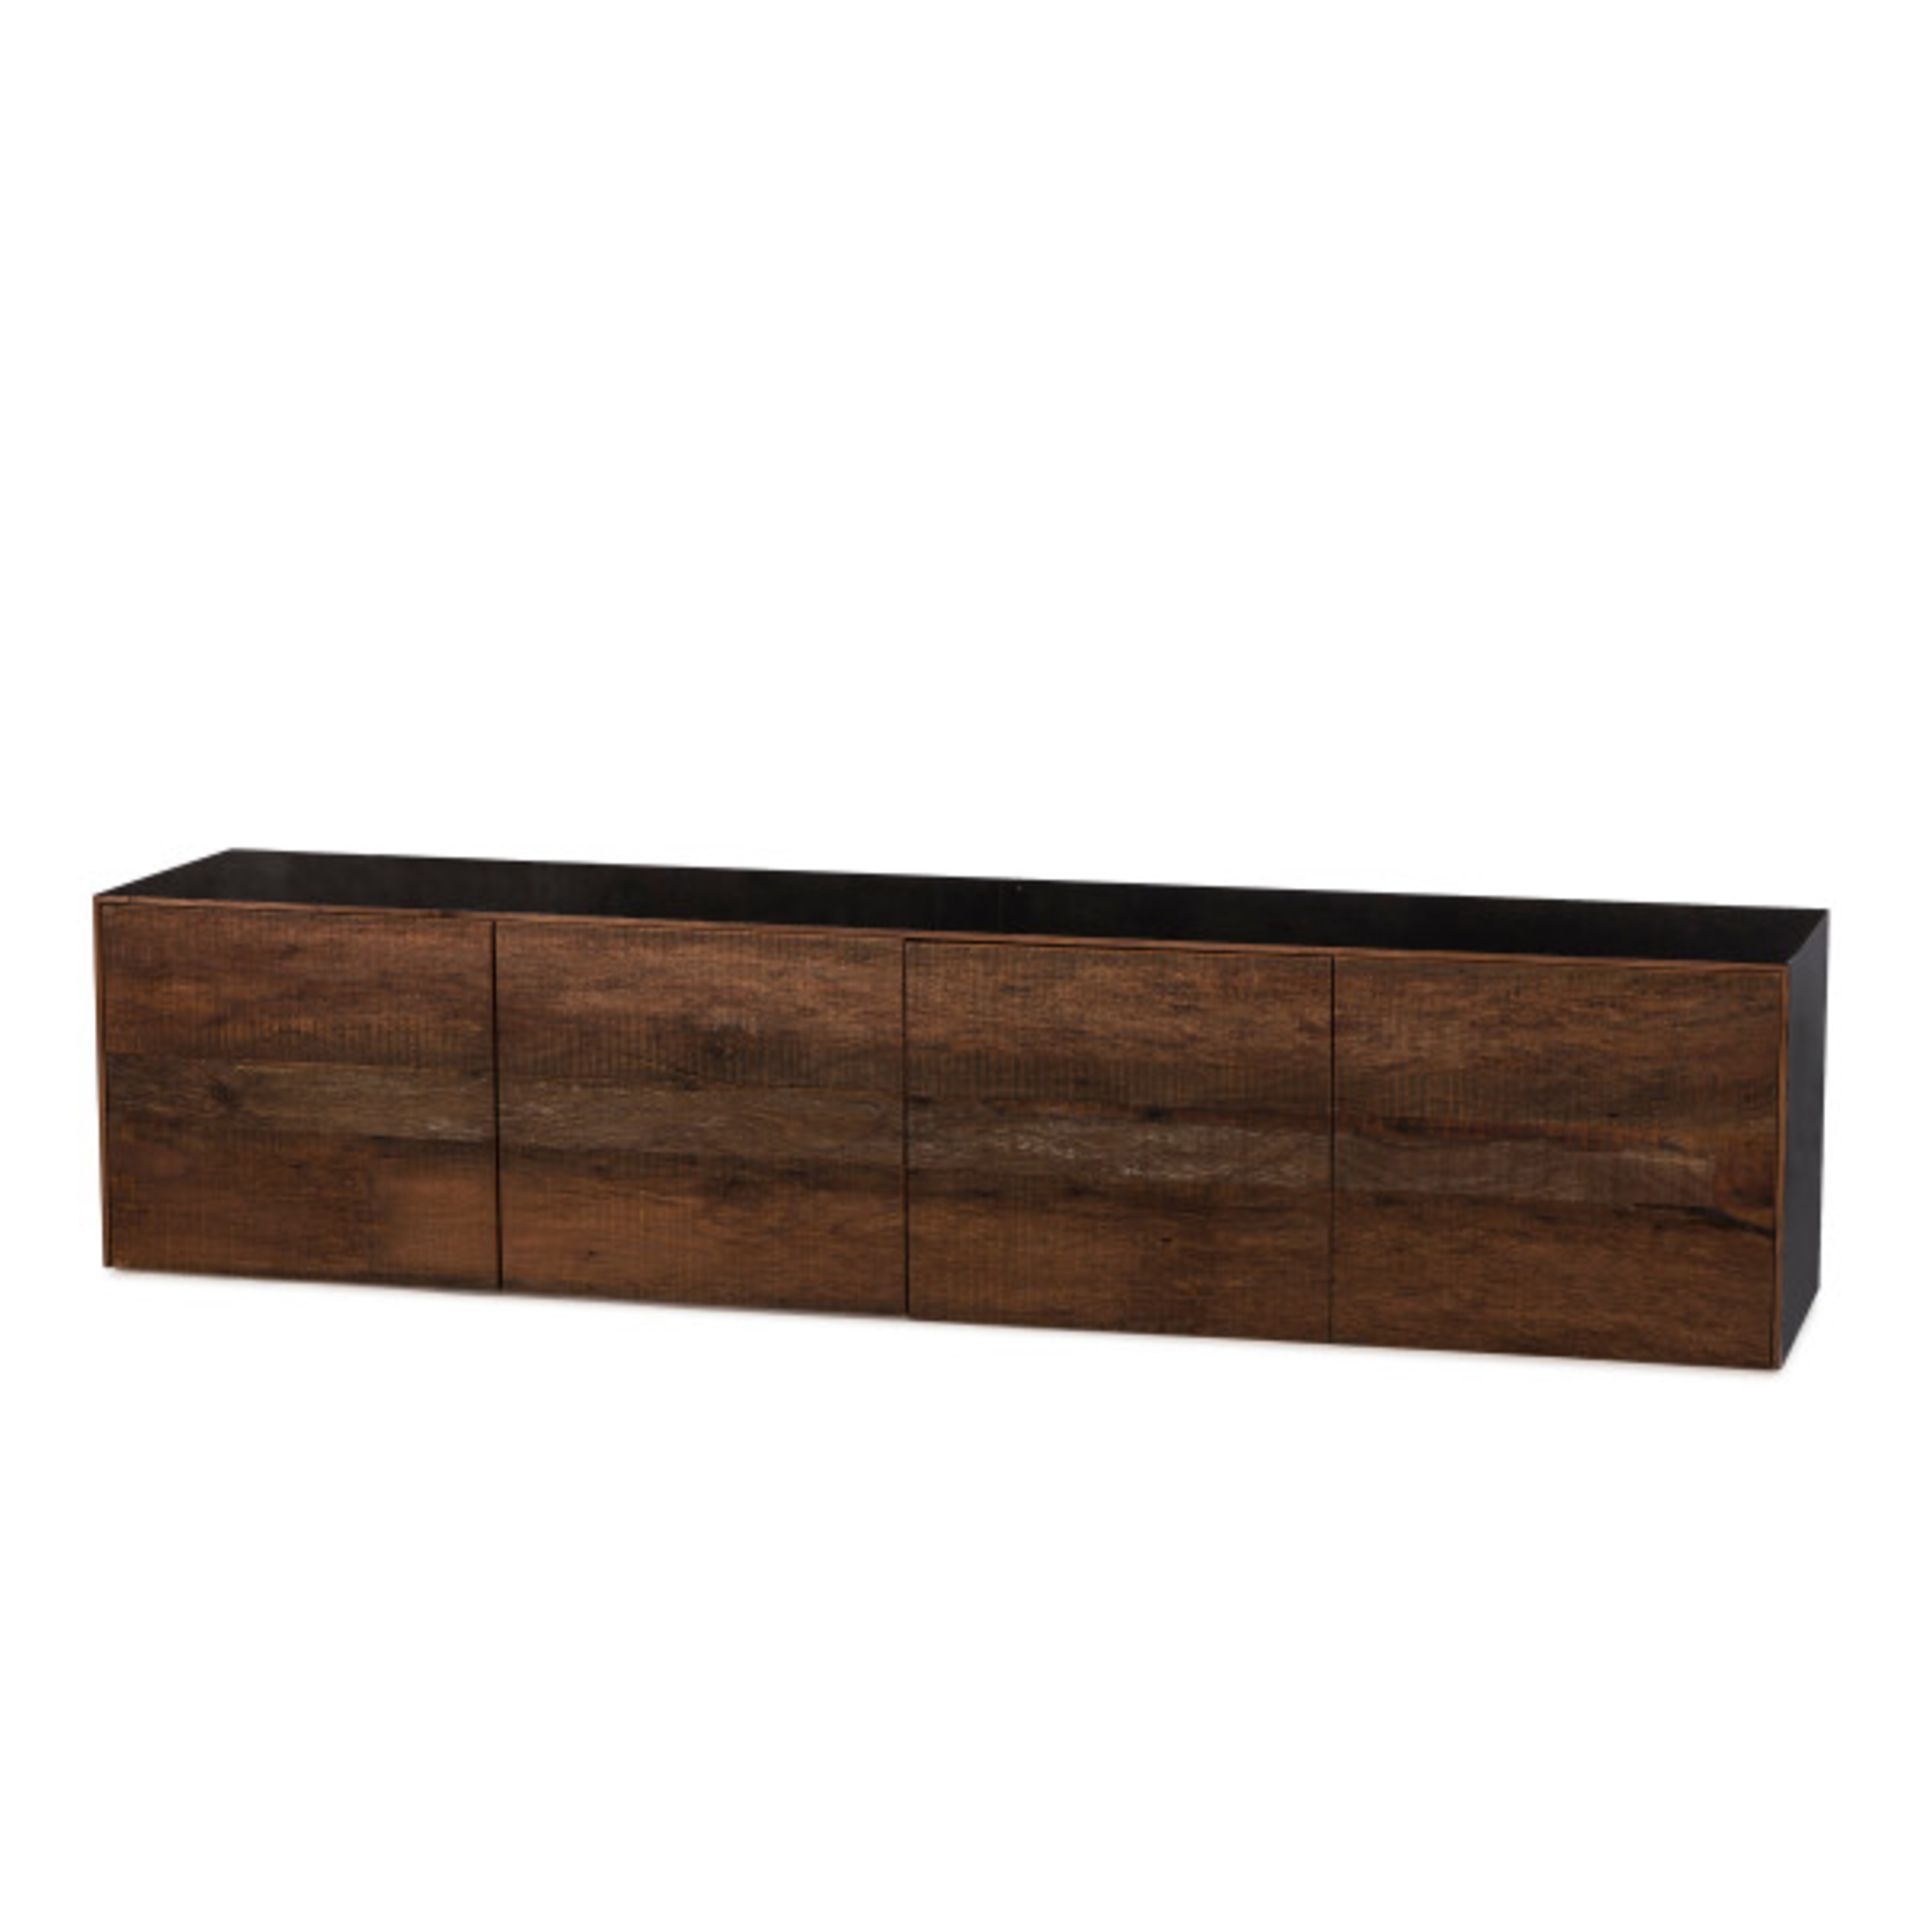 Thomas Bina Cabinets Cardosa Floating Media Console Table 213 x 45 x 48cm For renowned designer